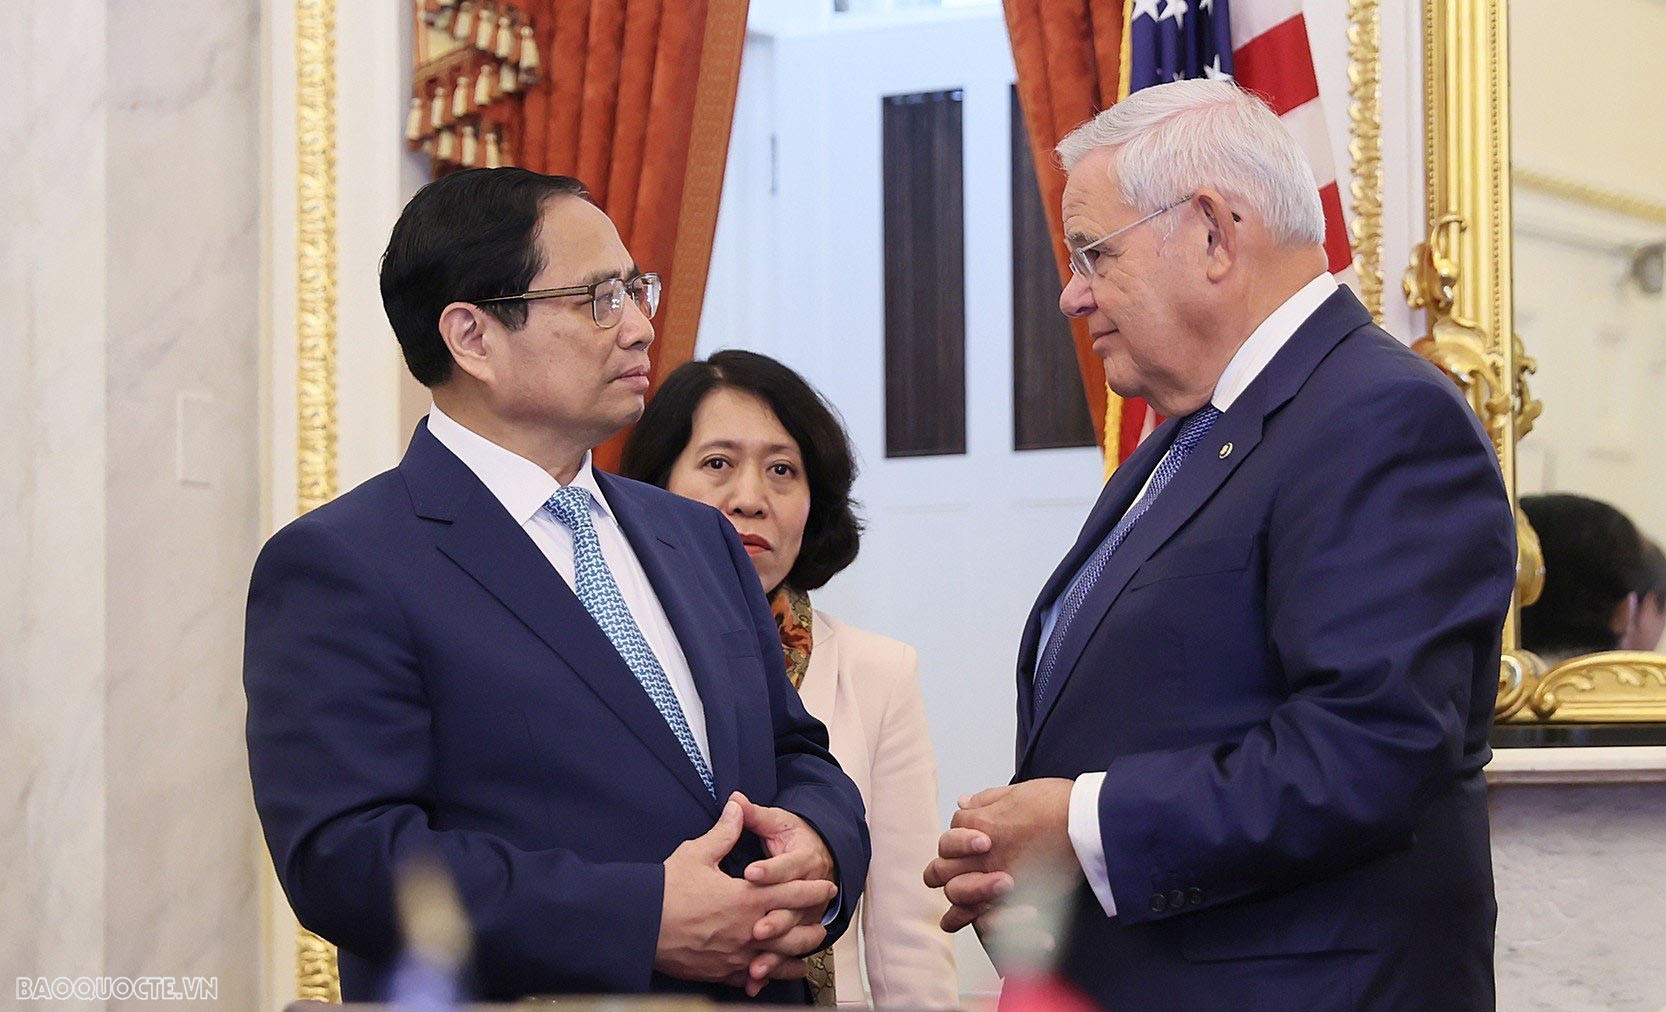 PM Pham Minh Chinh meets leaders of US Senate Committee on Foreign Relations